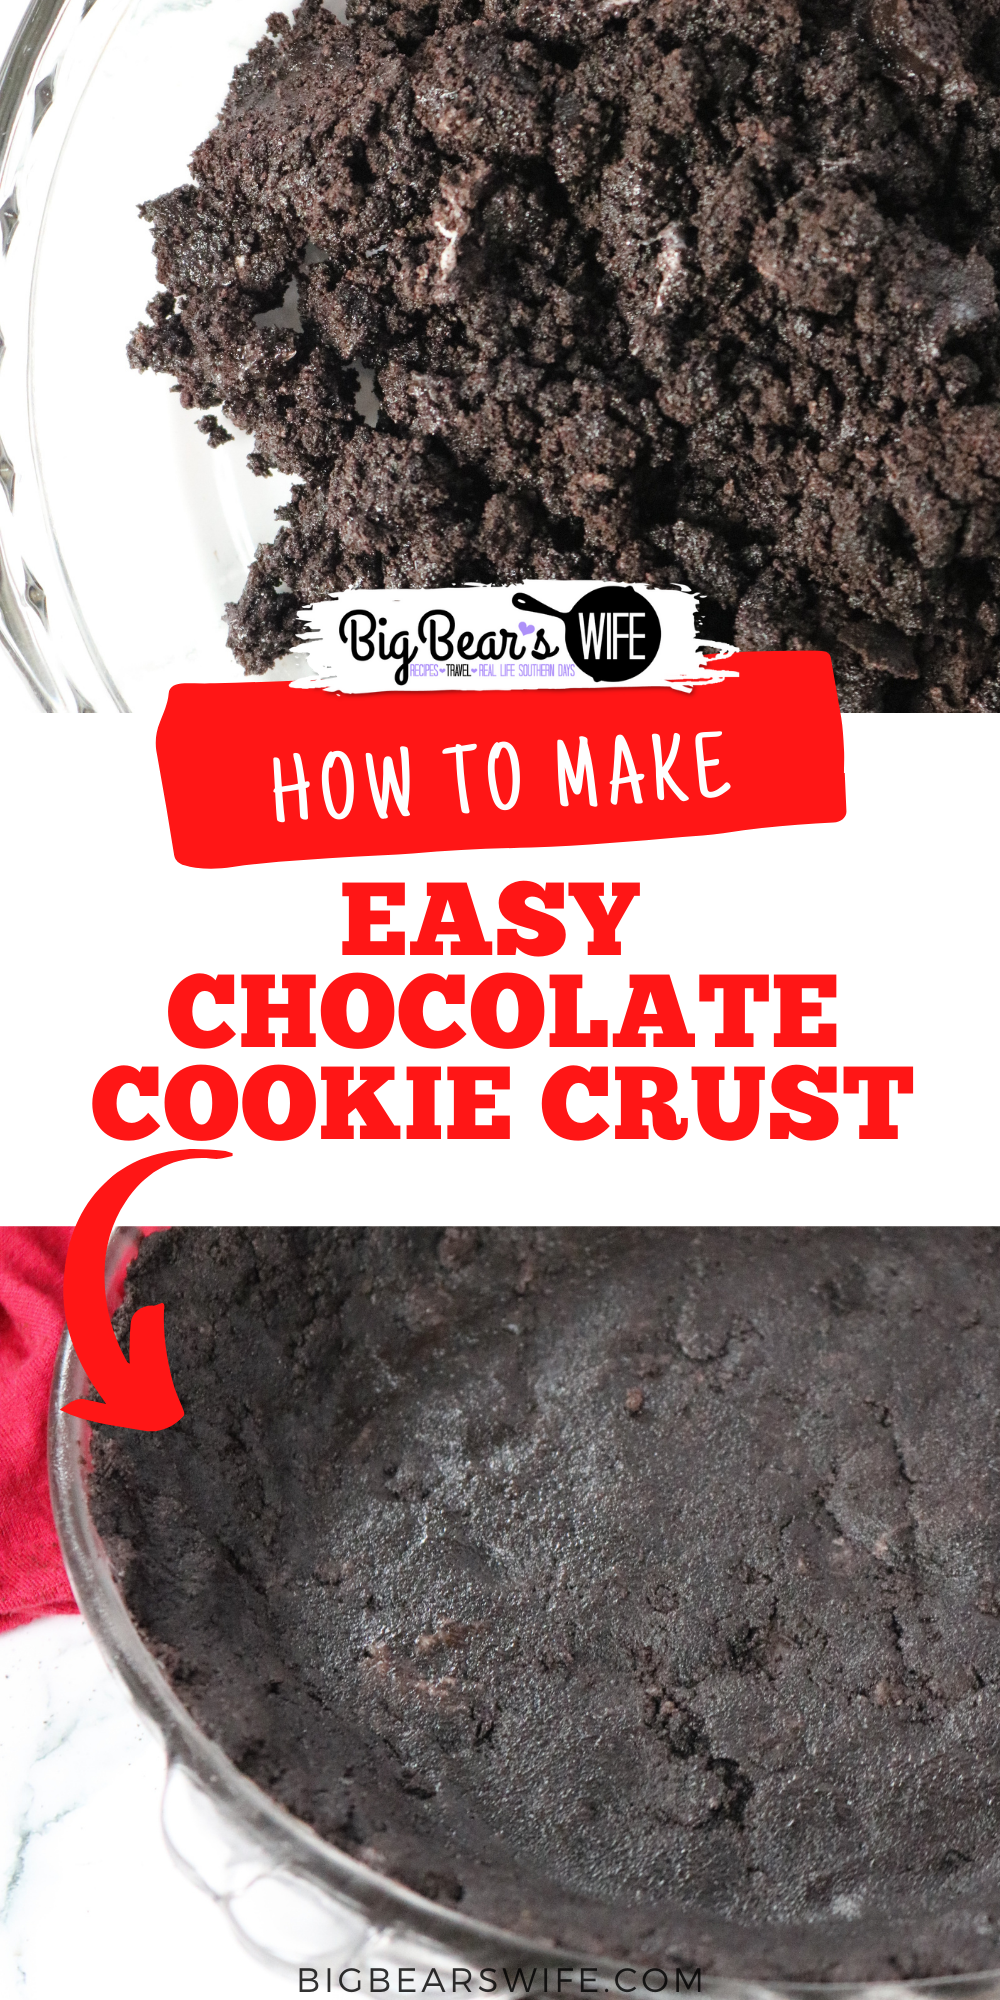 Two ingredients is all it takes to create this Easy Chocolate Cookie Crust at home! Perfect for Bake or No Bake Pie Options! This Oreo cookie crust is so delicious and easy to make! Easy Chocolate Cookie Crust - Bake or No Bake Options via @bigbearswife